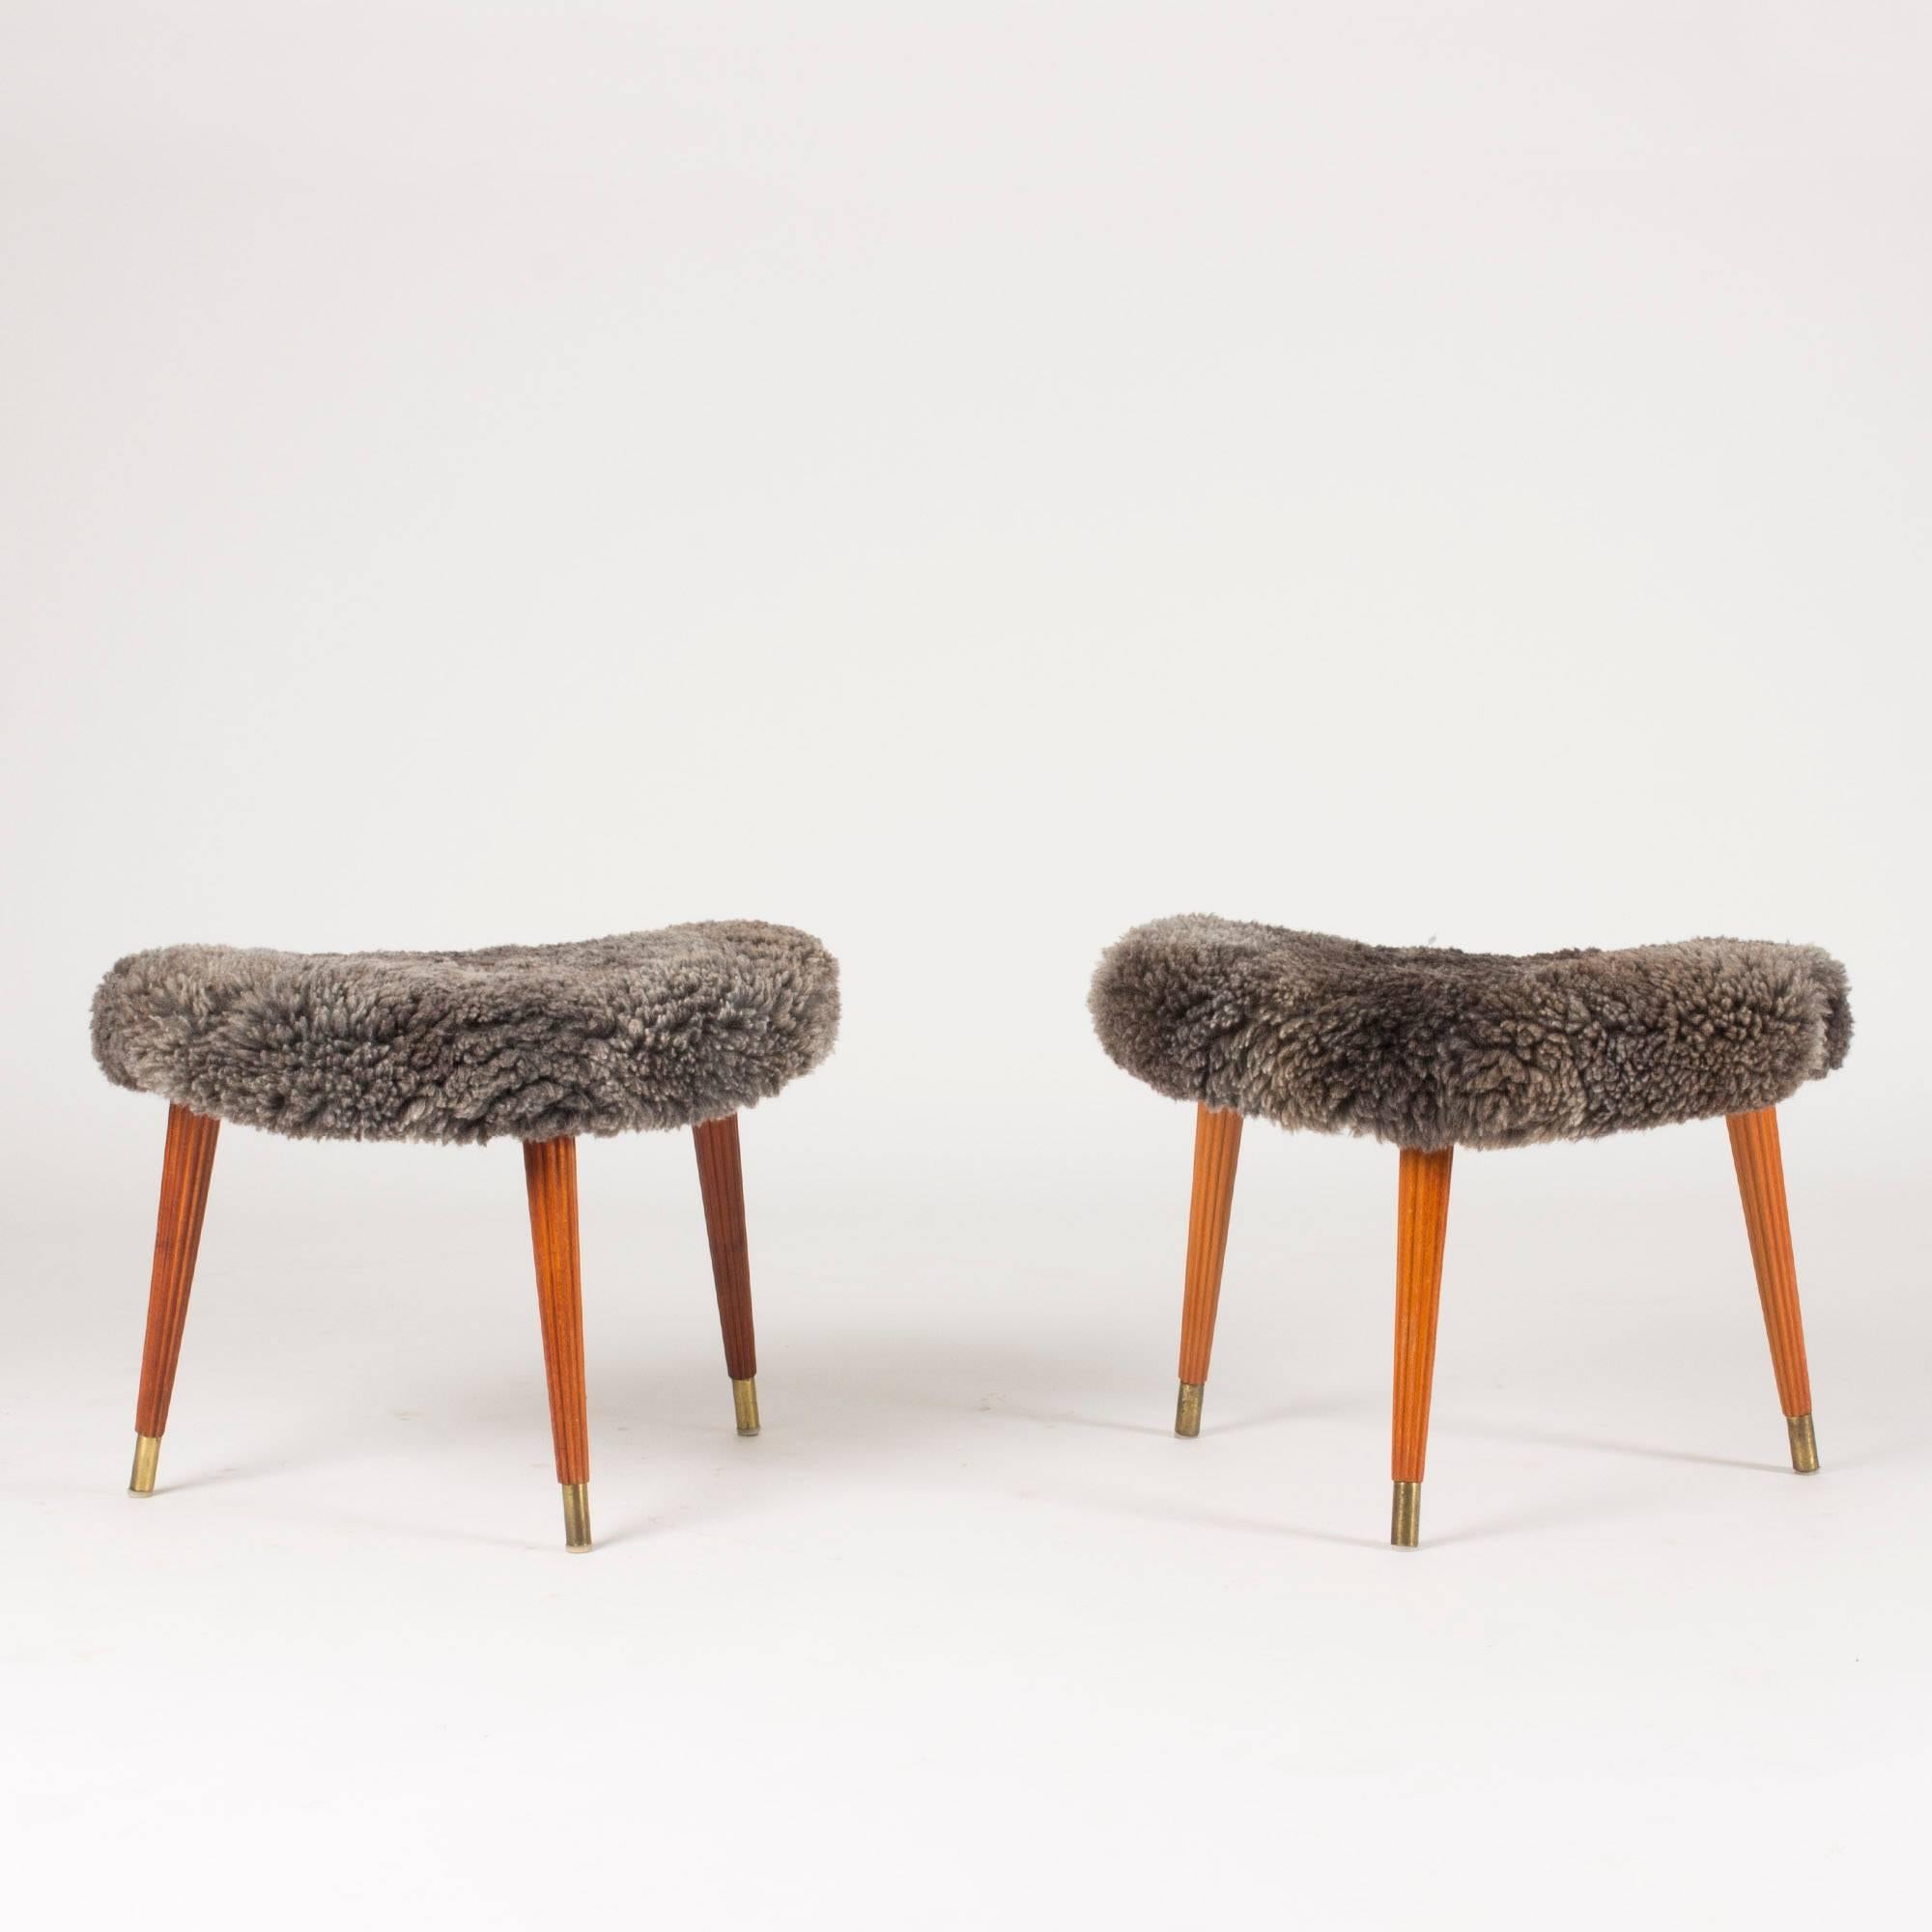 Pair of lovely kidney-shaped stools with seats dressed in sheepskin. Three mahogany legs on each stool with carved vertical striped and brass feet. Steady quality.